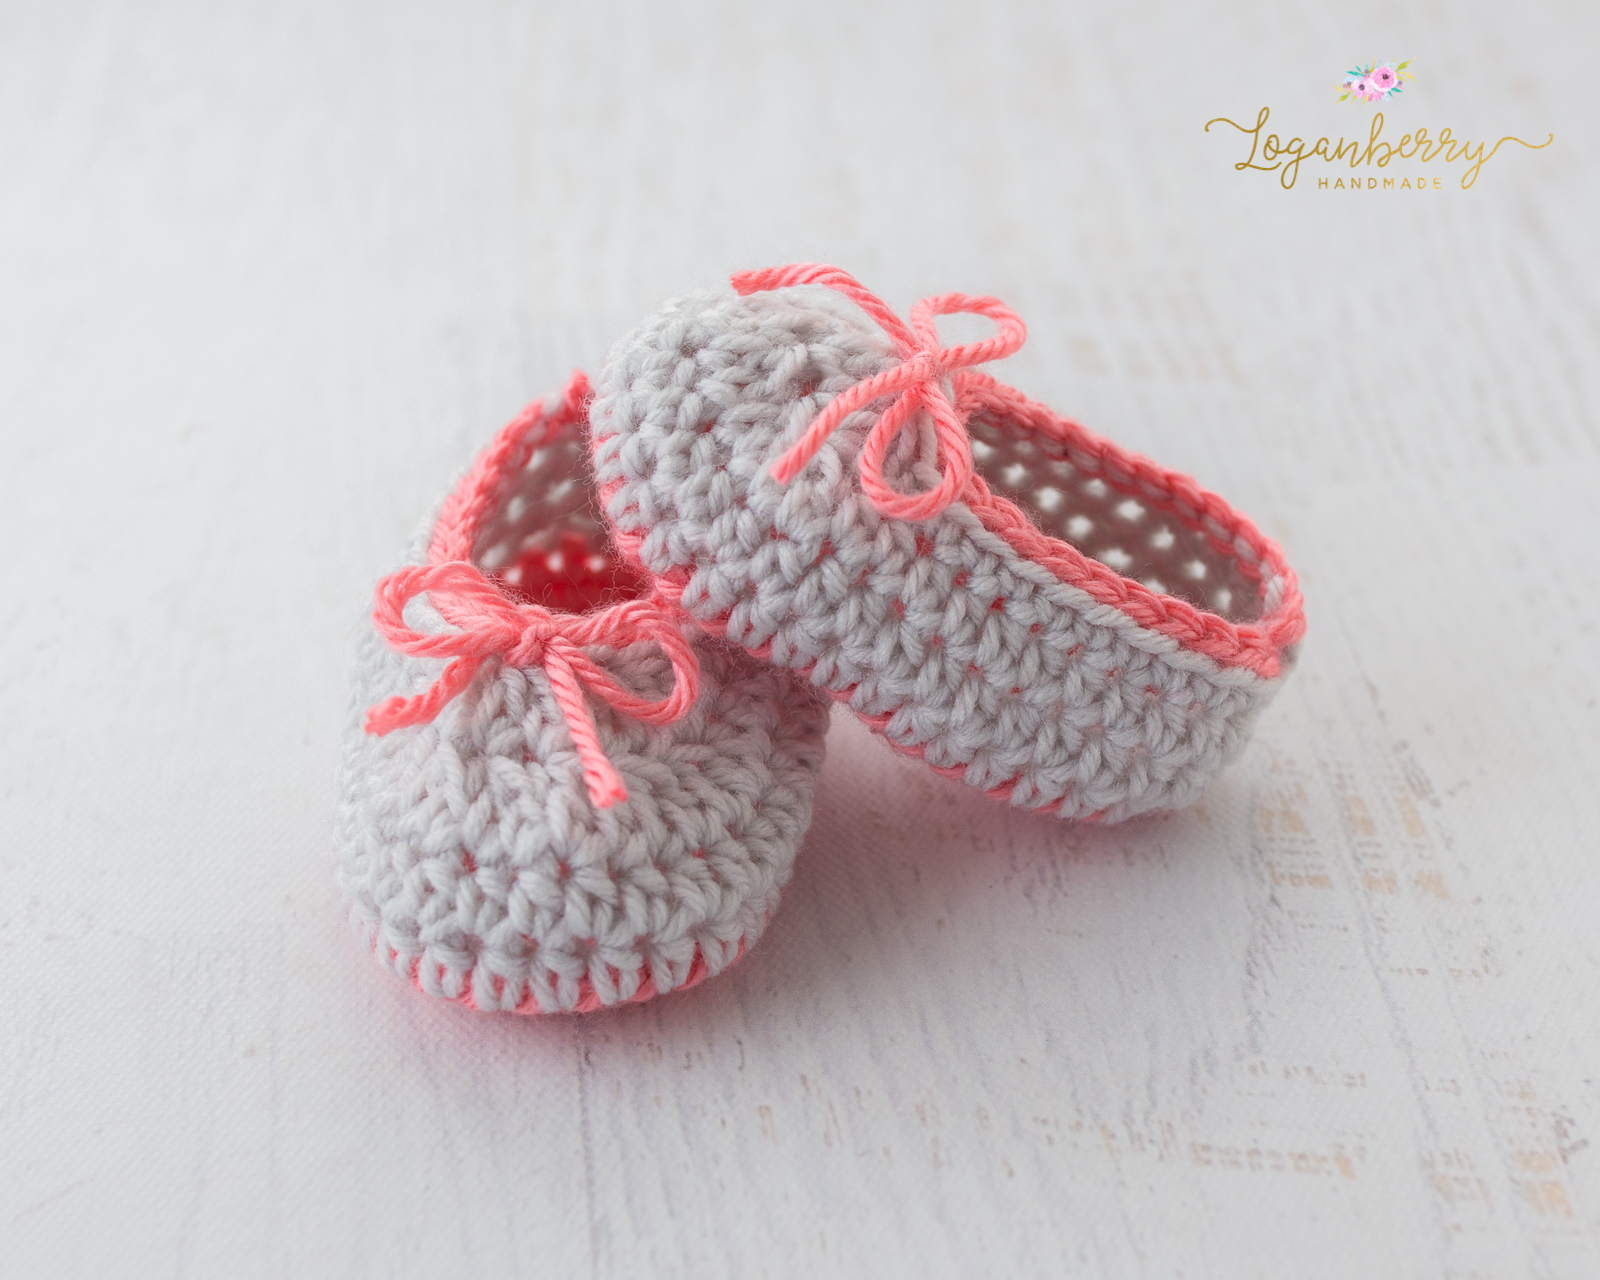 Crochet Pink Baby Shoes + Free Pattern - Loganberry Handmade